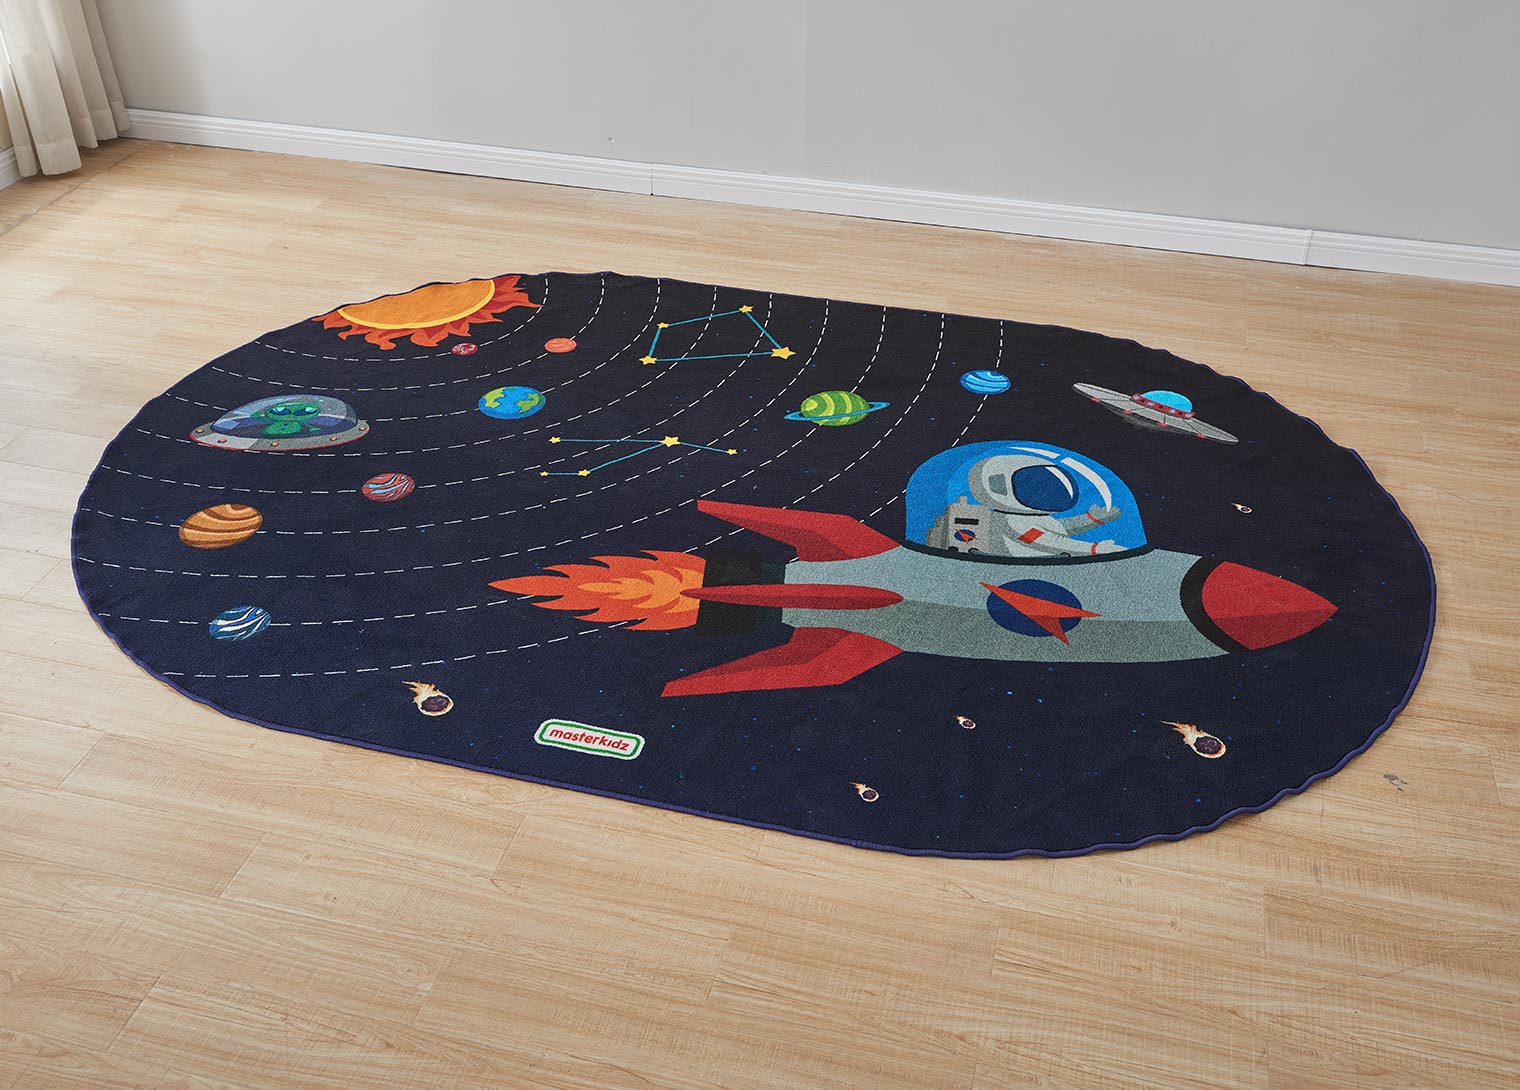 3000L Oval-Shaped Rug(Outer Space) - 3000L x 2000W